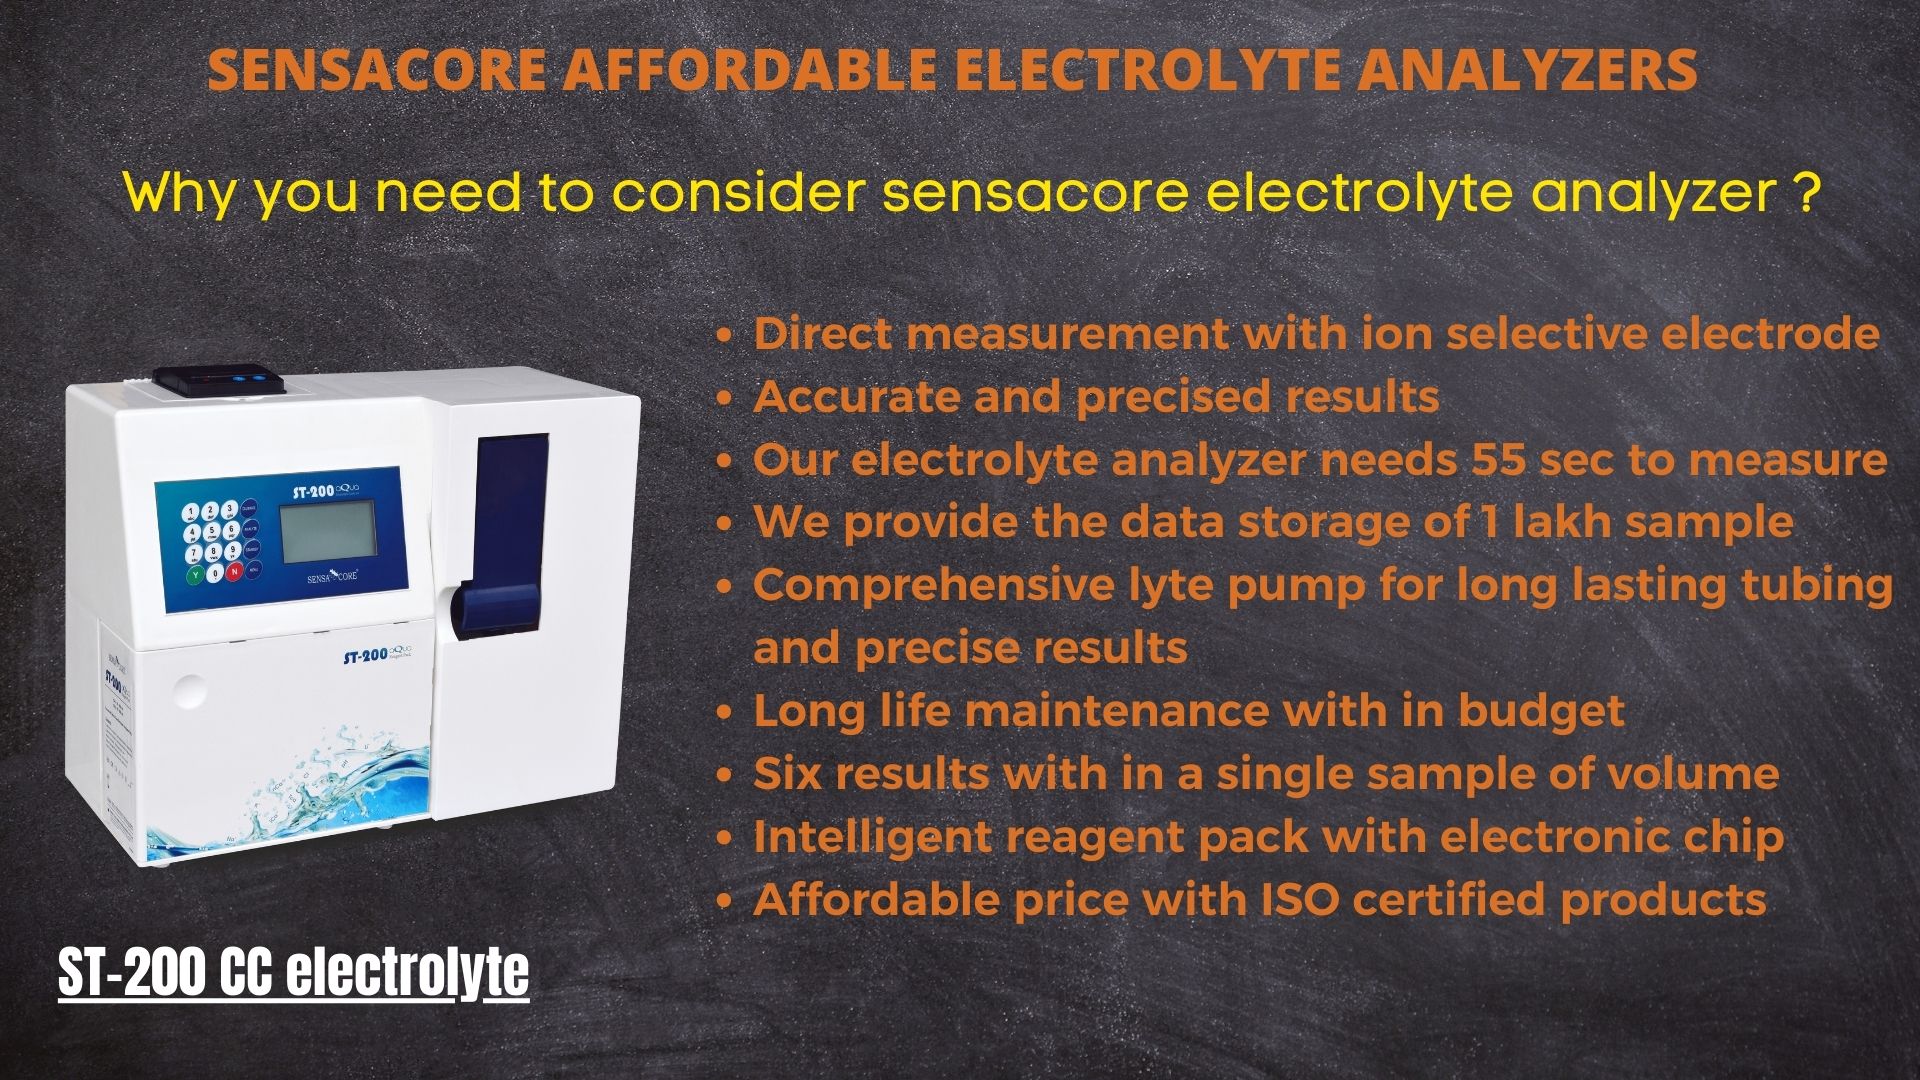 Sensacore electrolyte analyzer is the best affordable analyzer with low cost per test 

To Explore more about the product visit our website

https://www.sensacore.com/products/electrolyte-analyzer